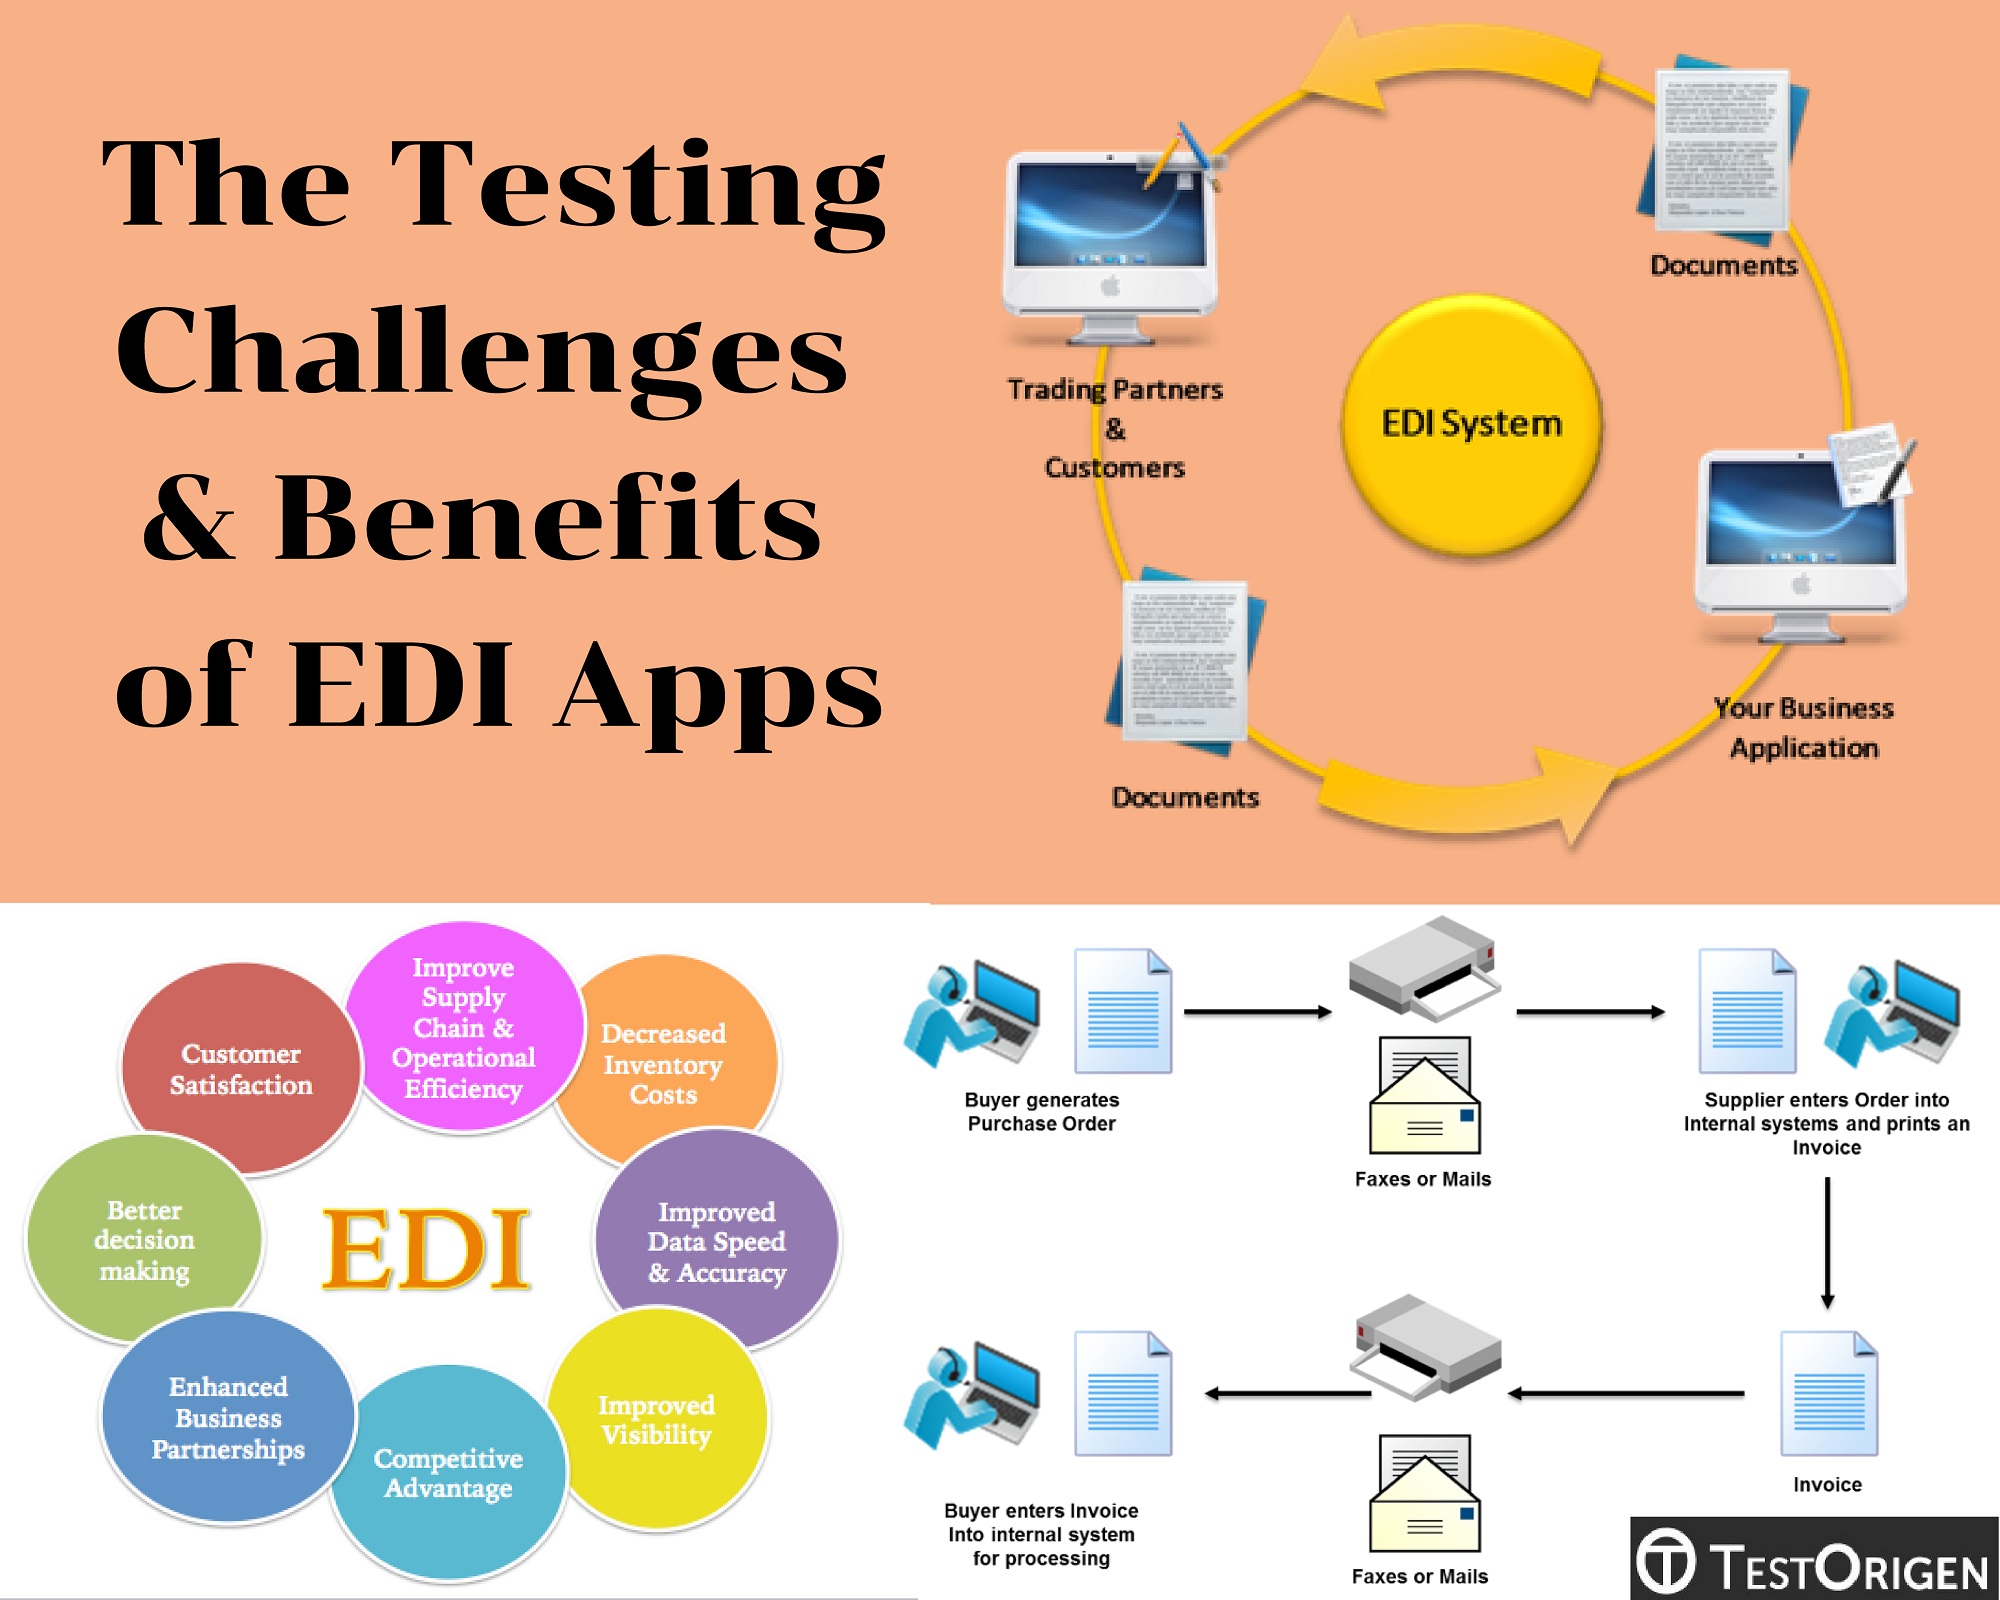 The Testing Challenges & Benefits of EDI Apps